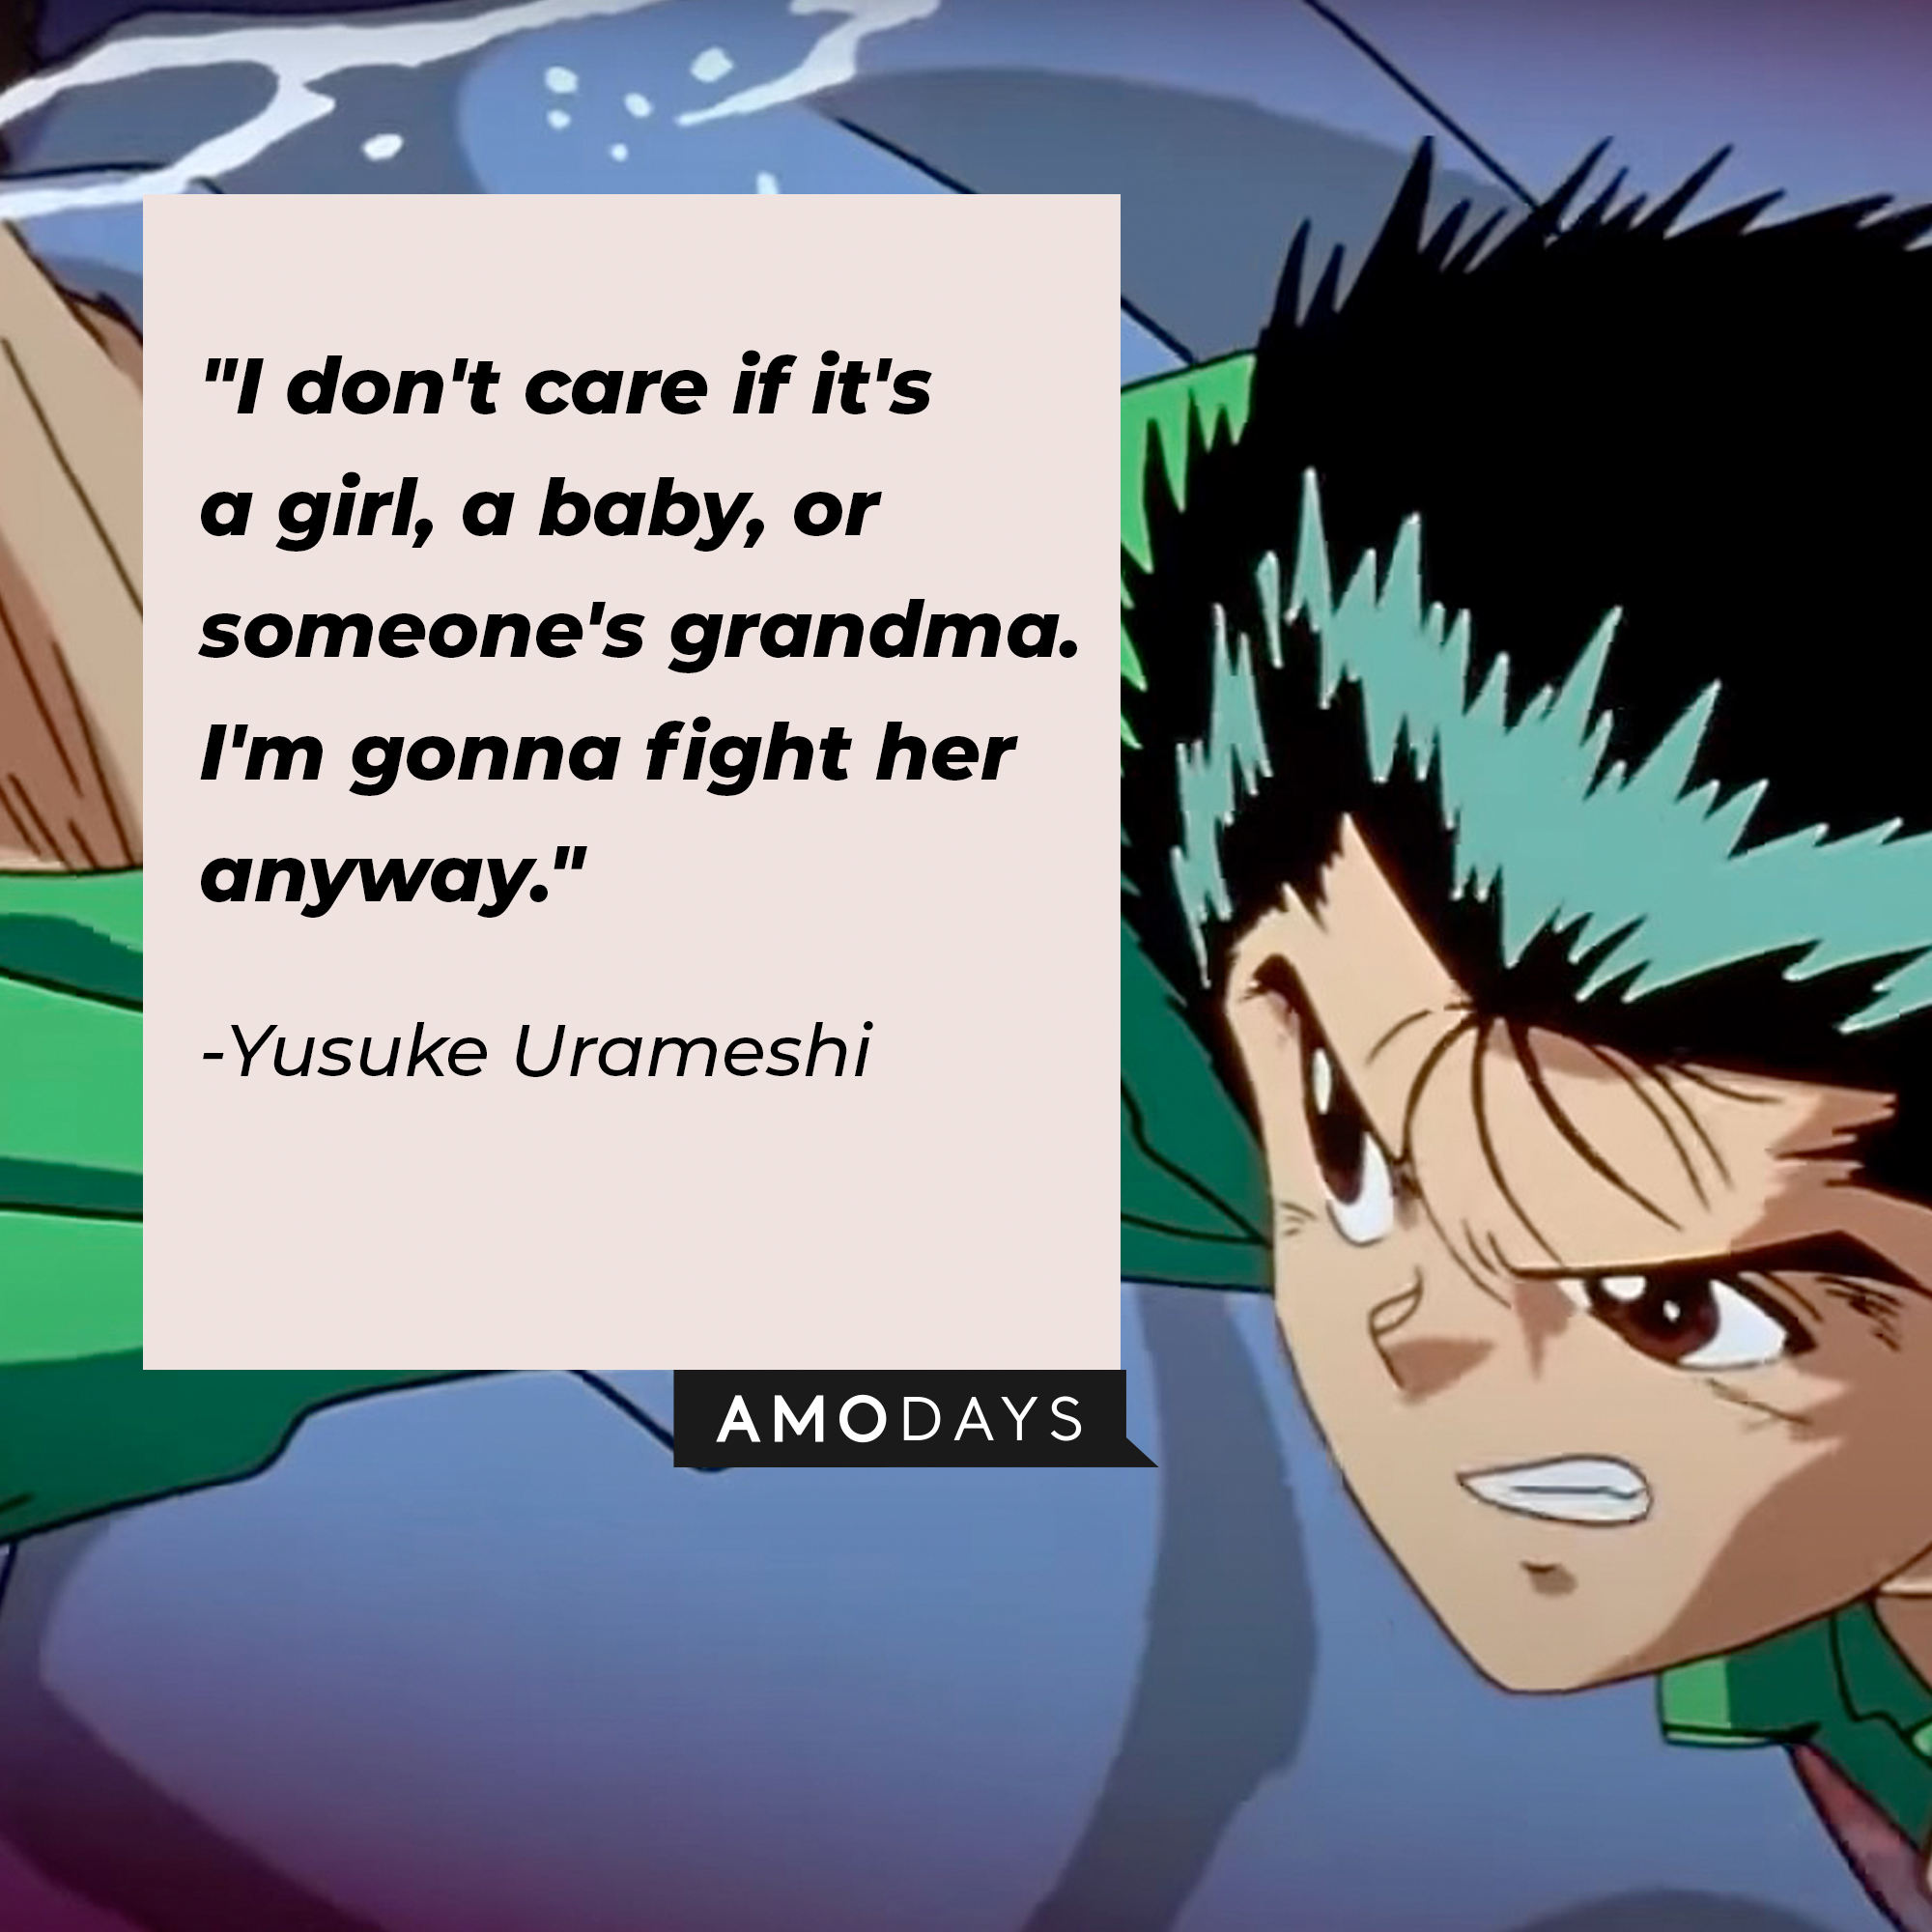 Yusuke Urameshi's quote: "I don't care if it's a girl, a baby, or someone's grandma. I'm gonna fight her anyway." | Source: Facebook.com/watchyuyuhakusho